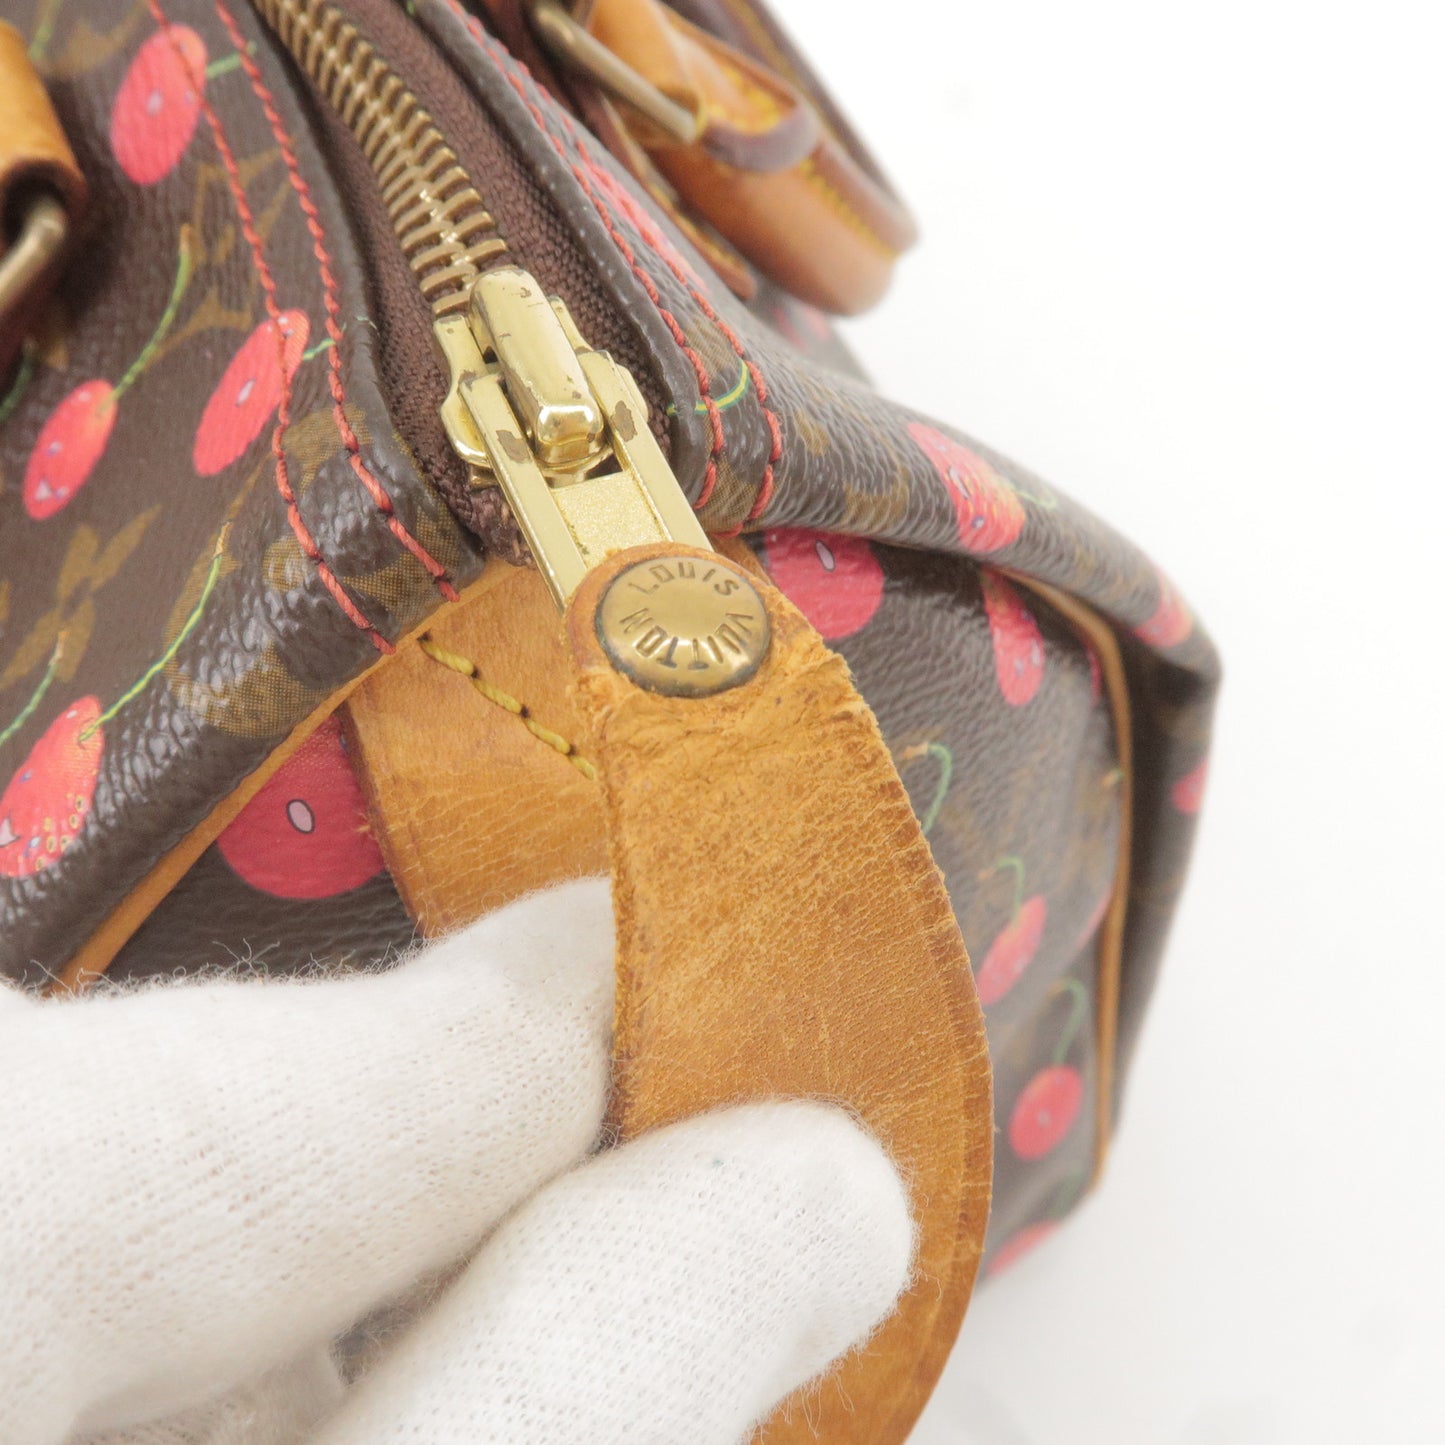 Louis Vuitton Speedy 25 Cerises Bag - Cherry, Monogrammed Canvas, Very Good  Condition - Auctions Luxembourg